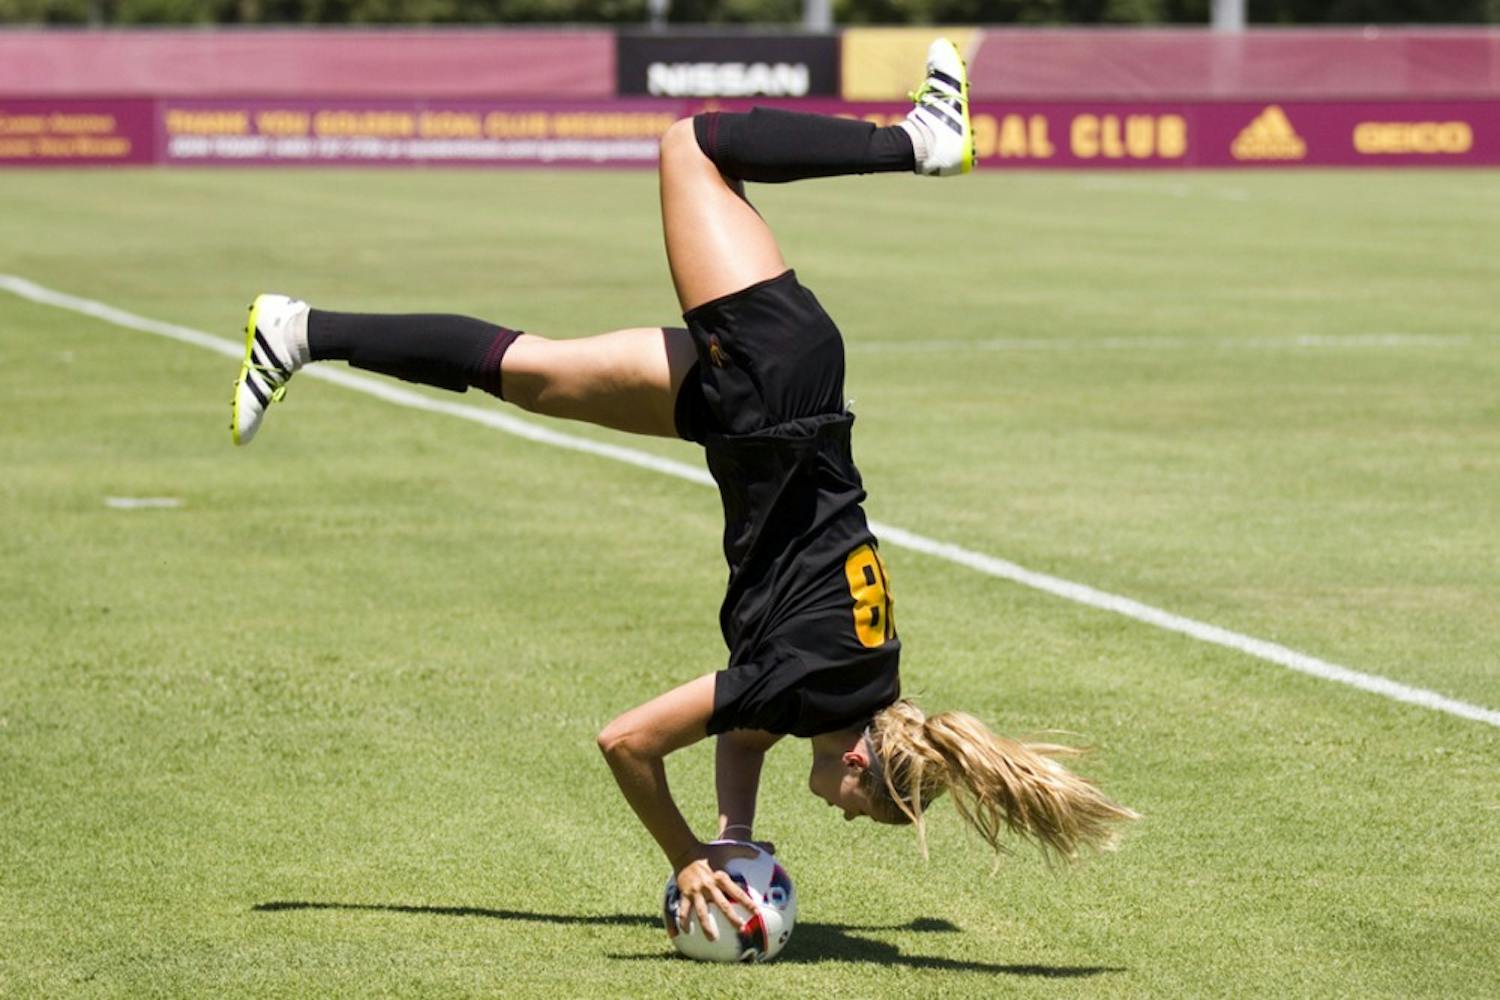 Freshman defender Hailey Zerbel flip-throws a ball inbounds during the second half of an exhibition game against Beijing Normal in Sun Devil Soccer Stadium in Tempe, Arizona, on Saturday, August 27, 2016. Arizona State lost the exhibition game to Bejing Normal, 1-0.